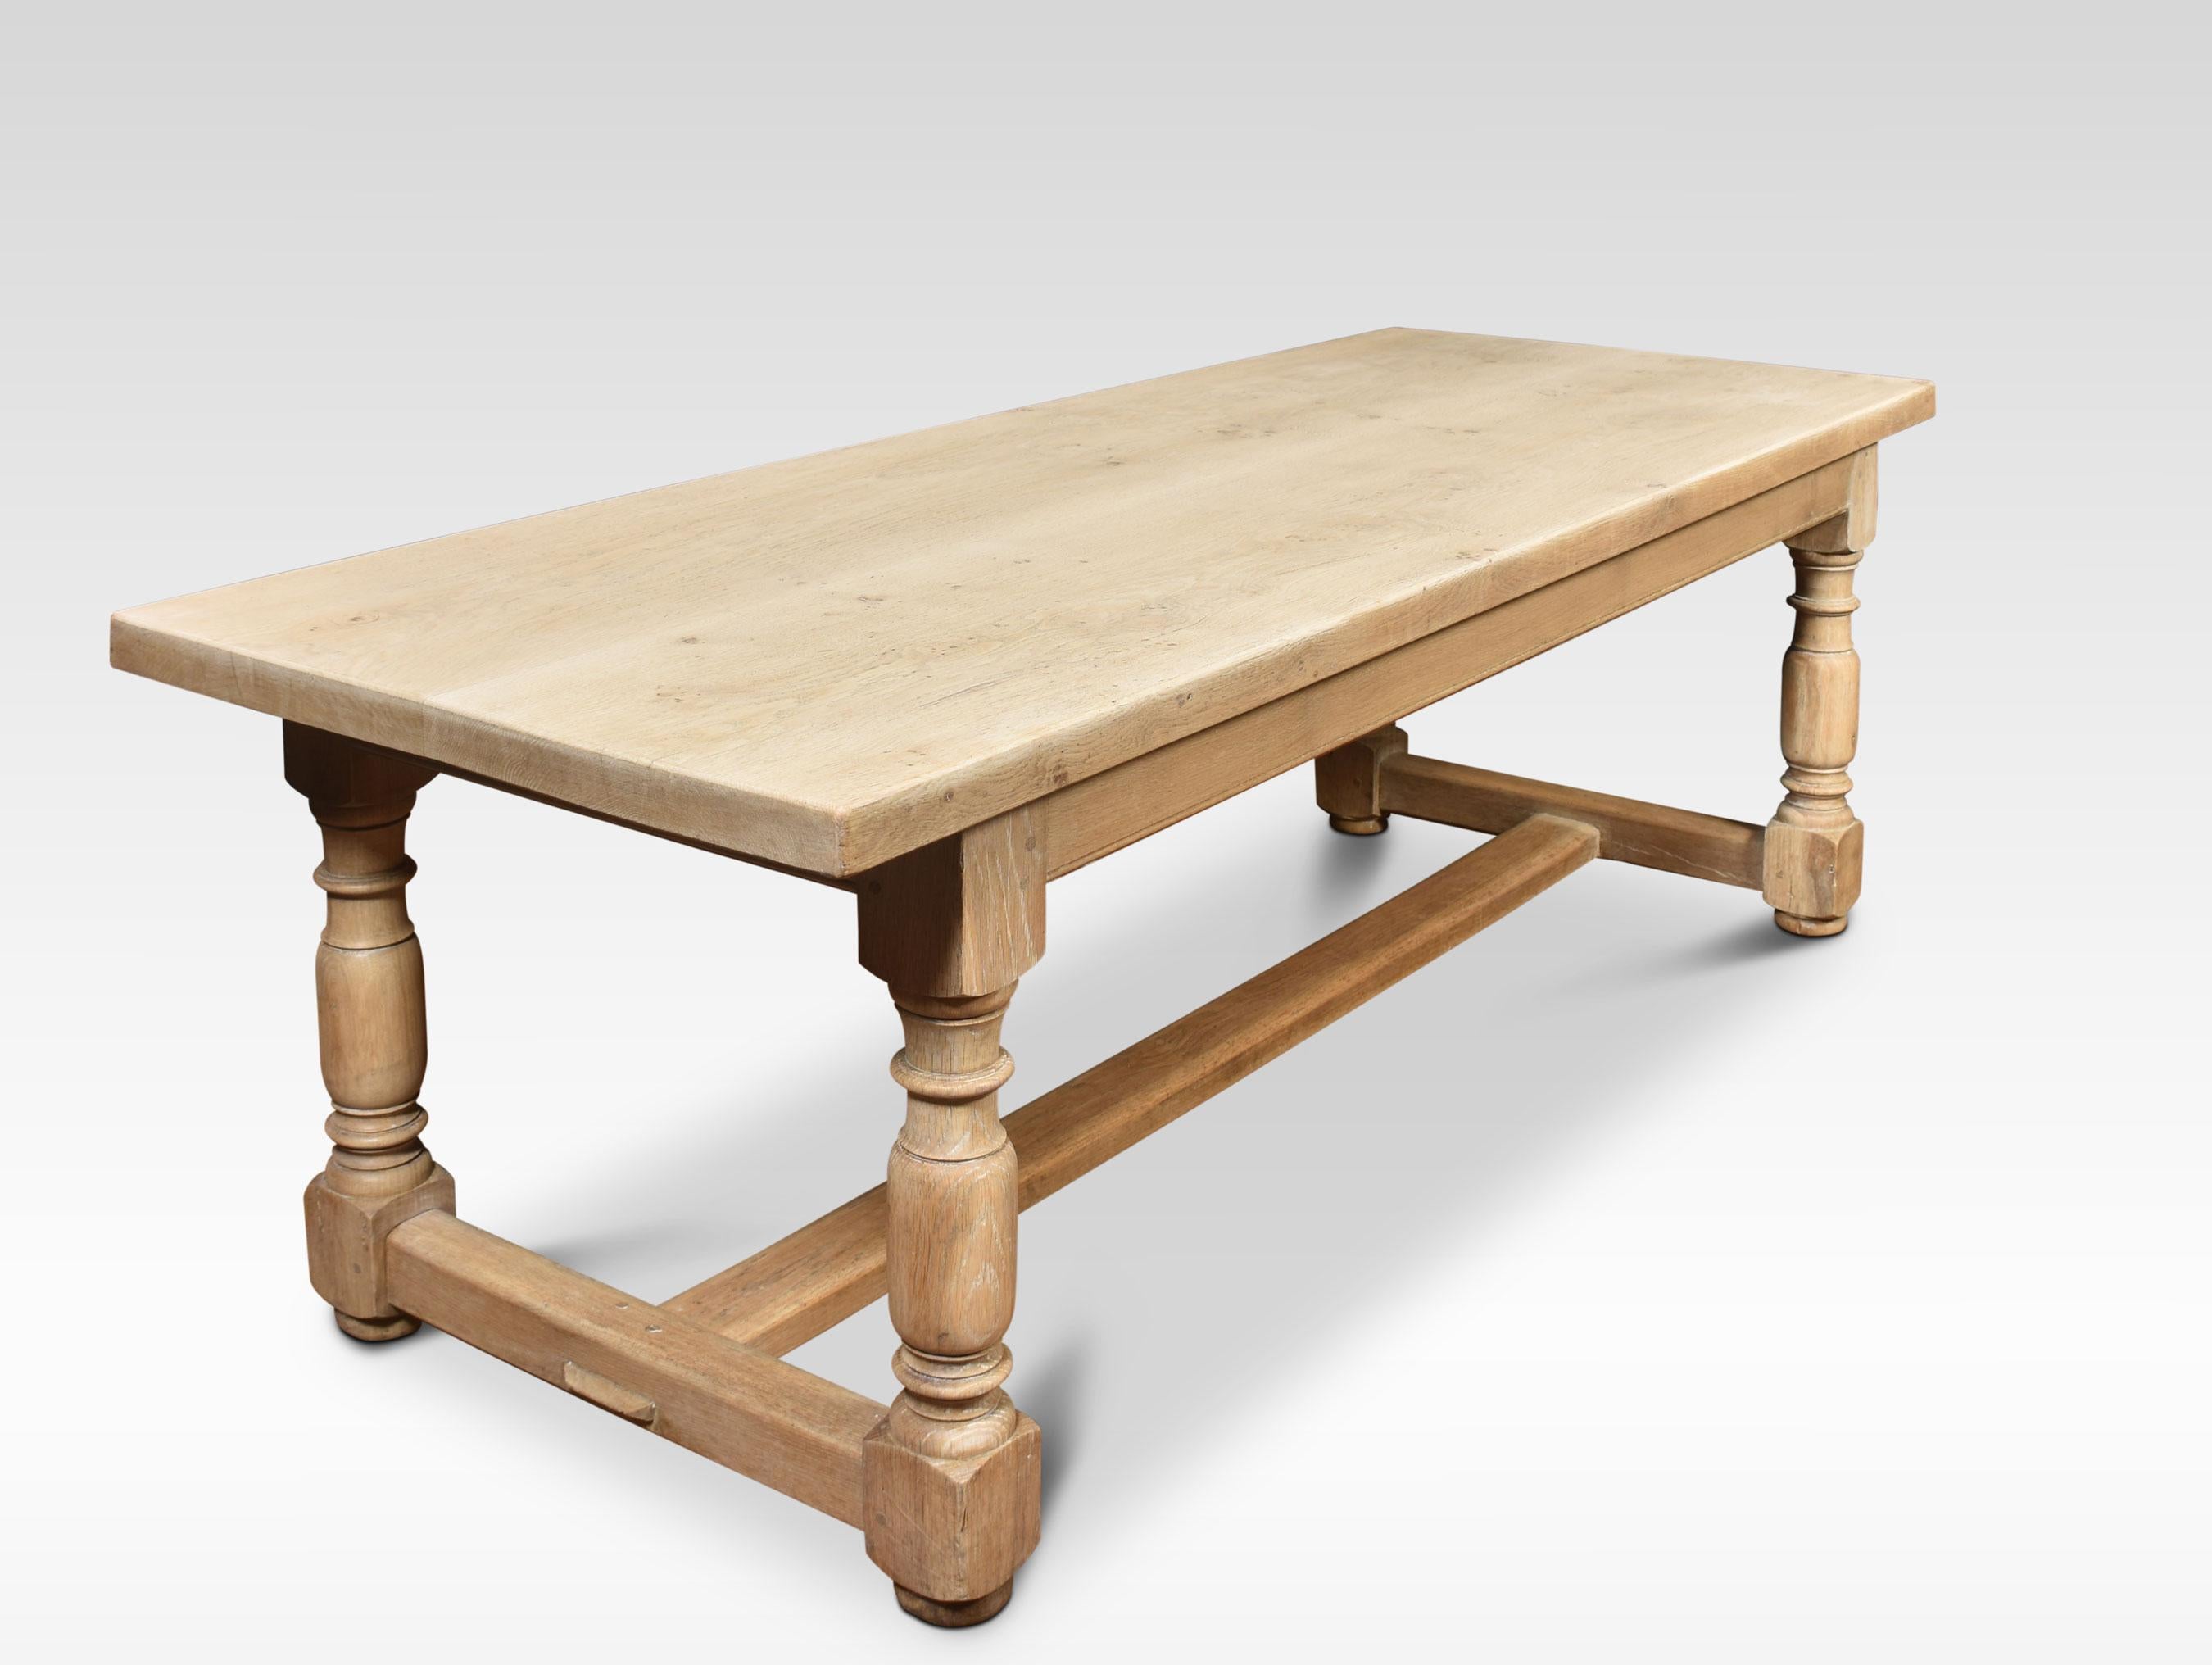 Bleached oak refectory table. The large rectangular plank top, raised on four turned supports united by an H stretcher.
Dimensions
Height 29 Inches height to rail 23.5 Inches
Width 82 Inches
Depth 32 Inches.